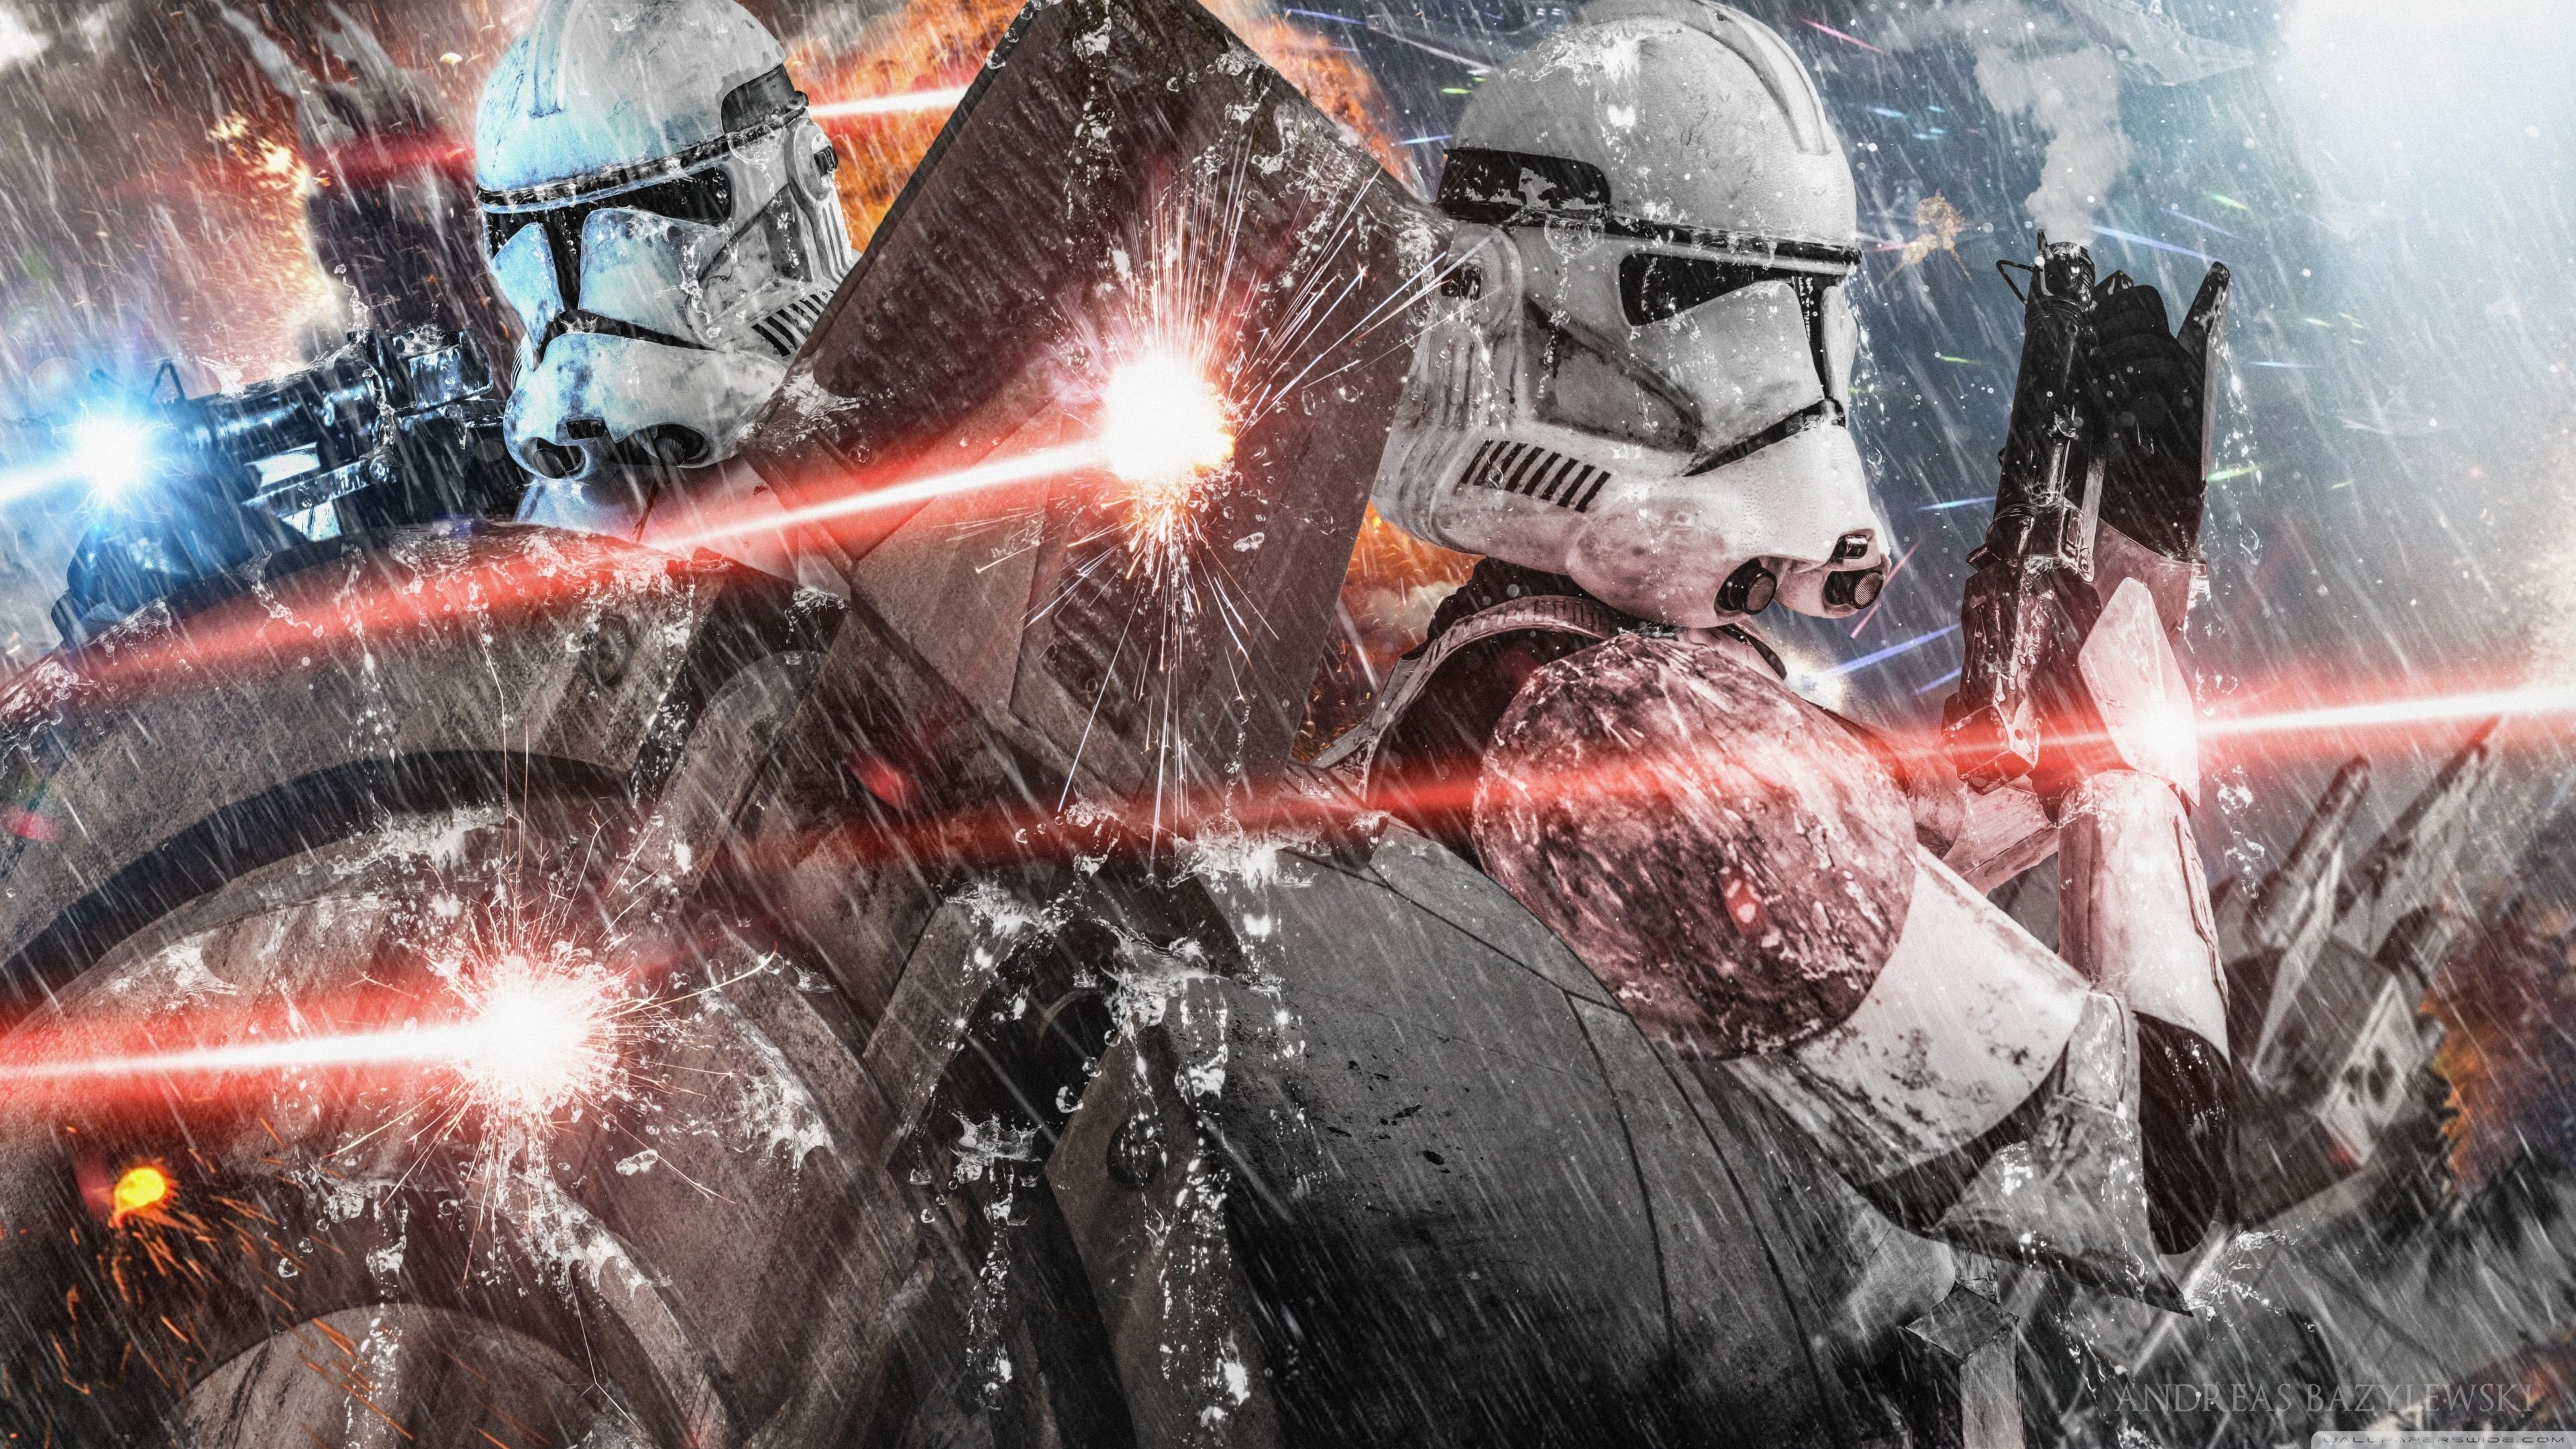 3840x2160 3840 X 2160 Star Wars Wallpapers Top Free 3840 X 2160 Star Wars Backgrounds